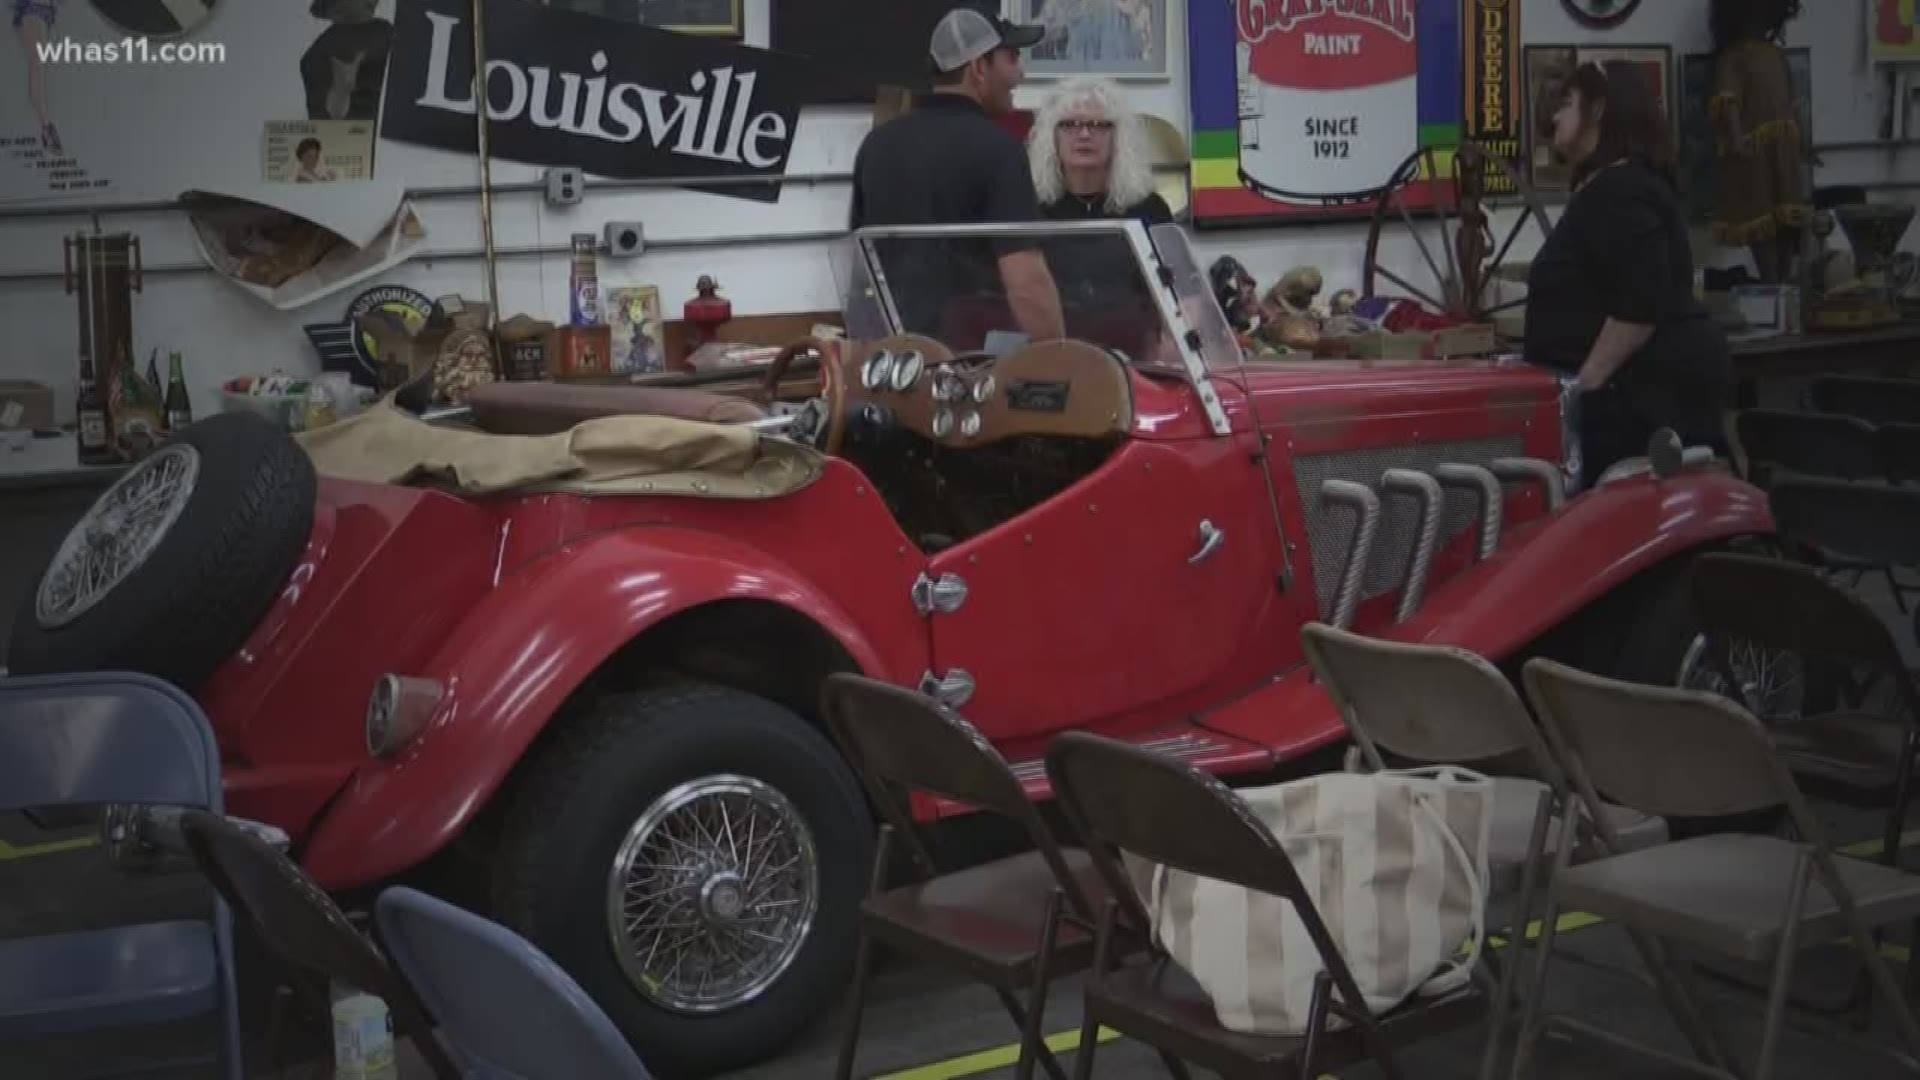 Man's prized junk goes up for auction